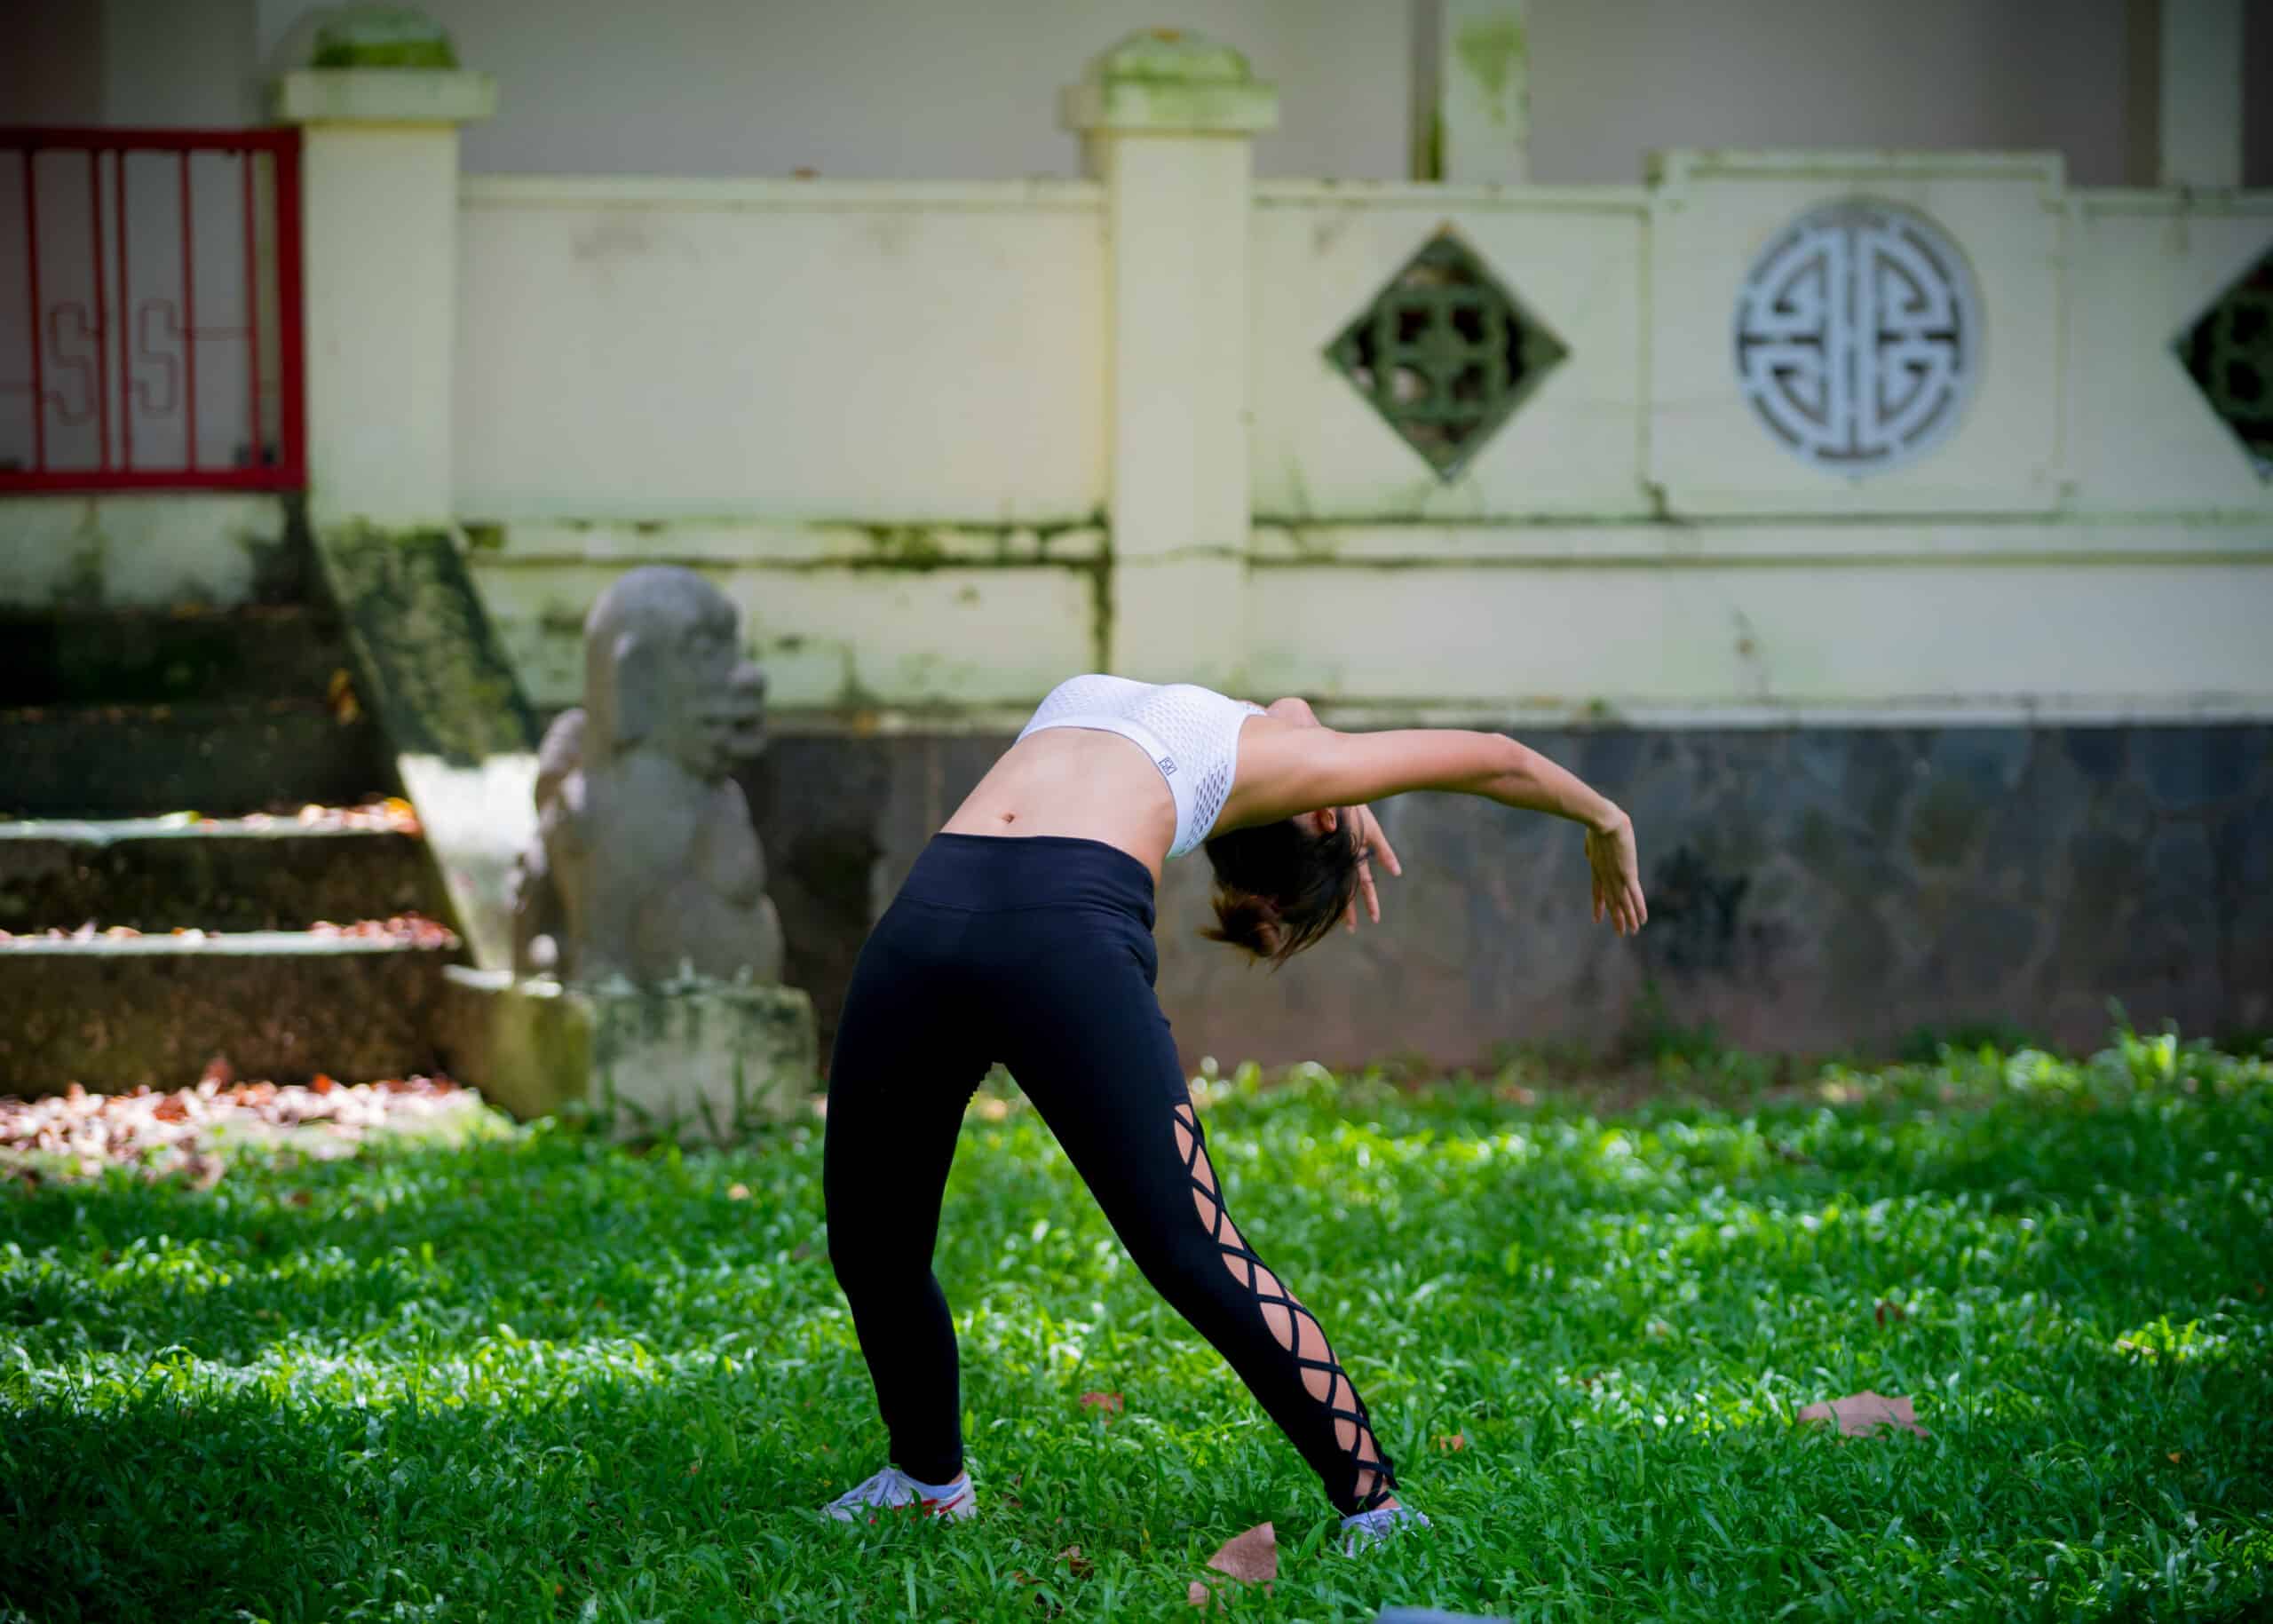 A woman in sports attire practicing qigong in the park surrounded by grass